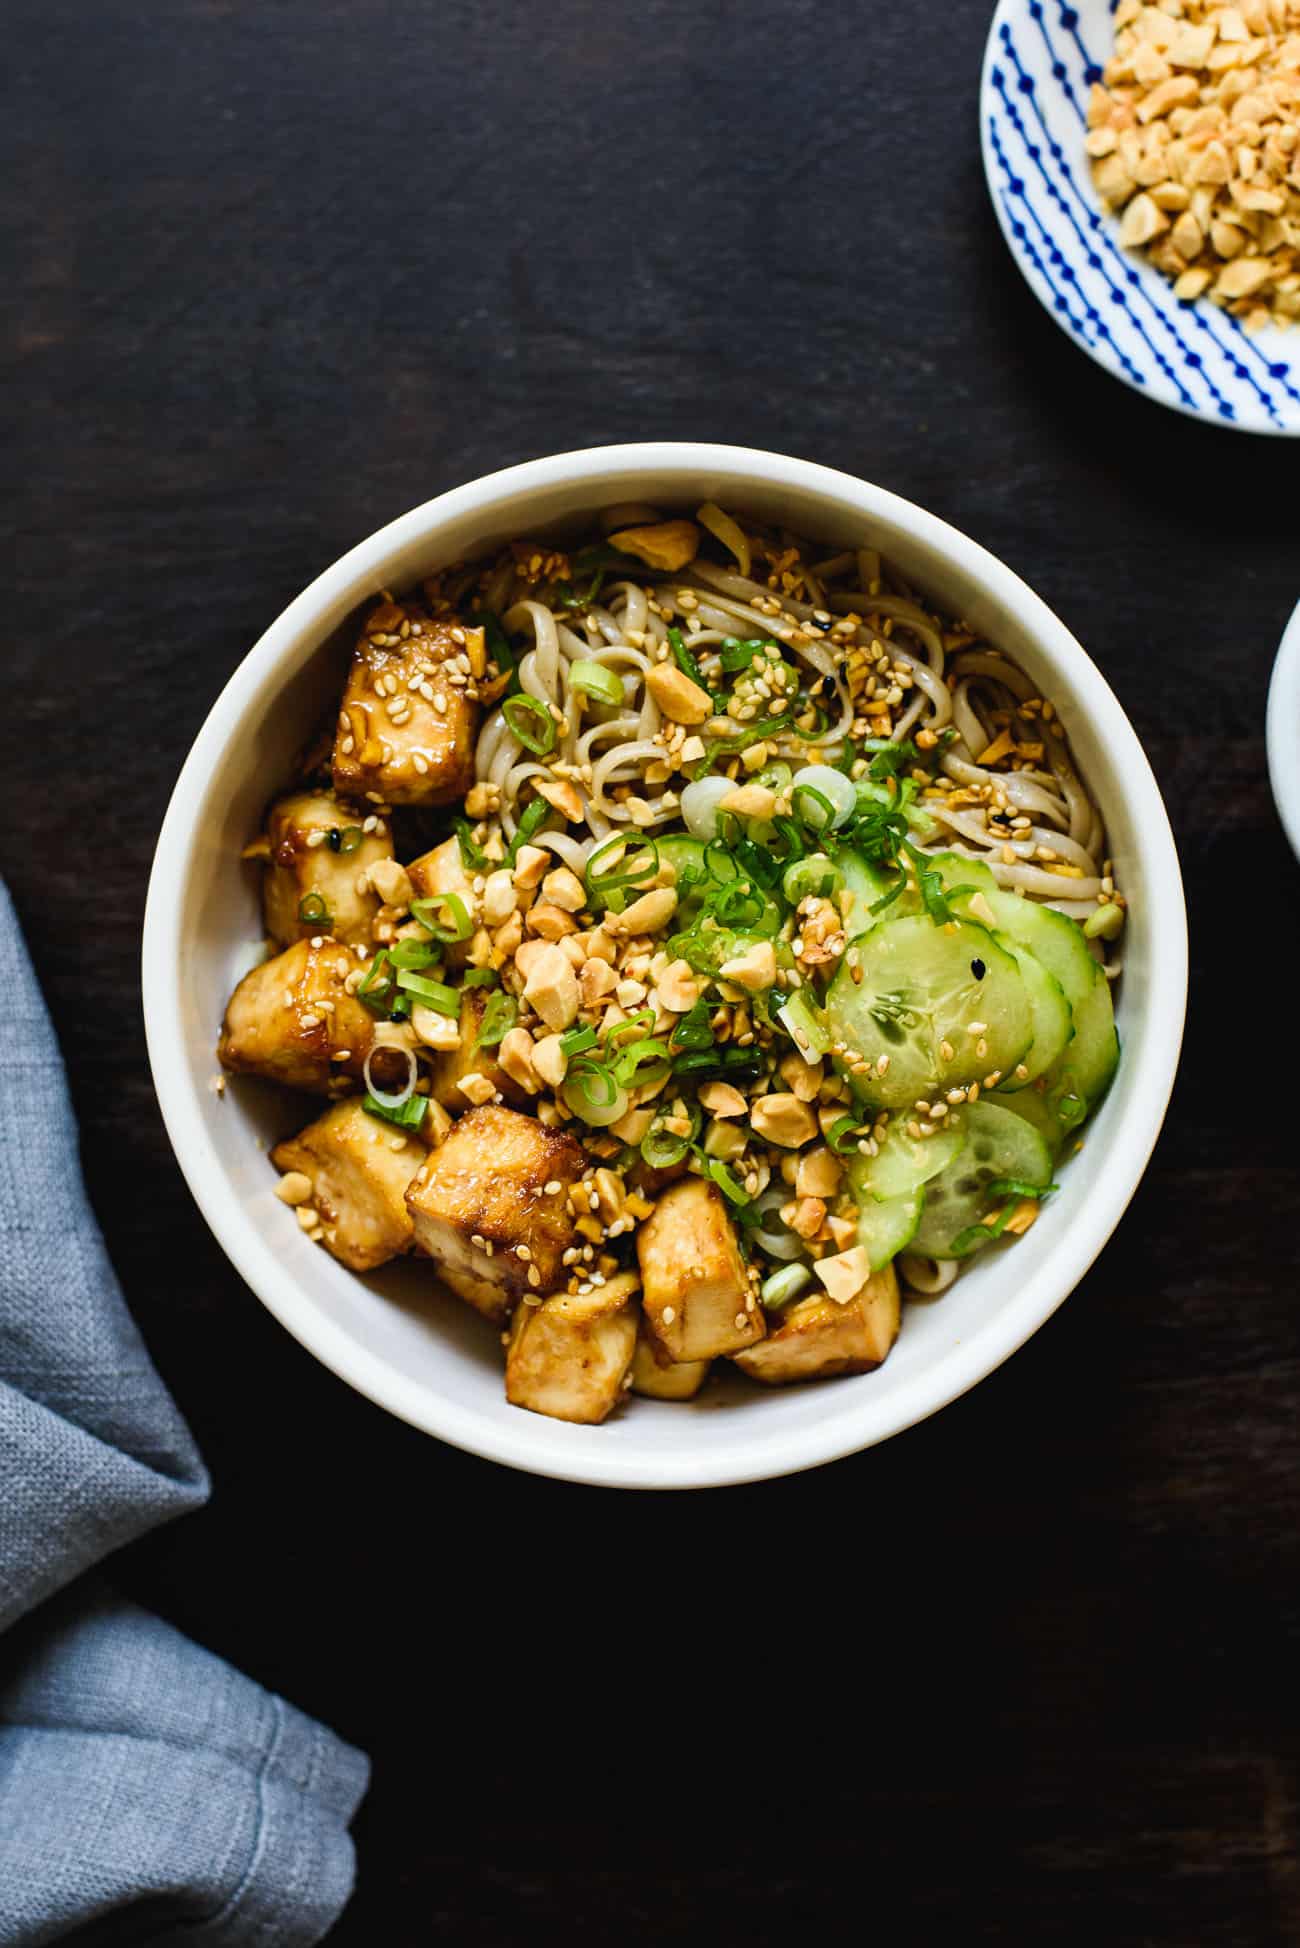 Soba noodle bowl with cucumbers, scallions, peanuts, and baked tofu on a dark wooden table